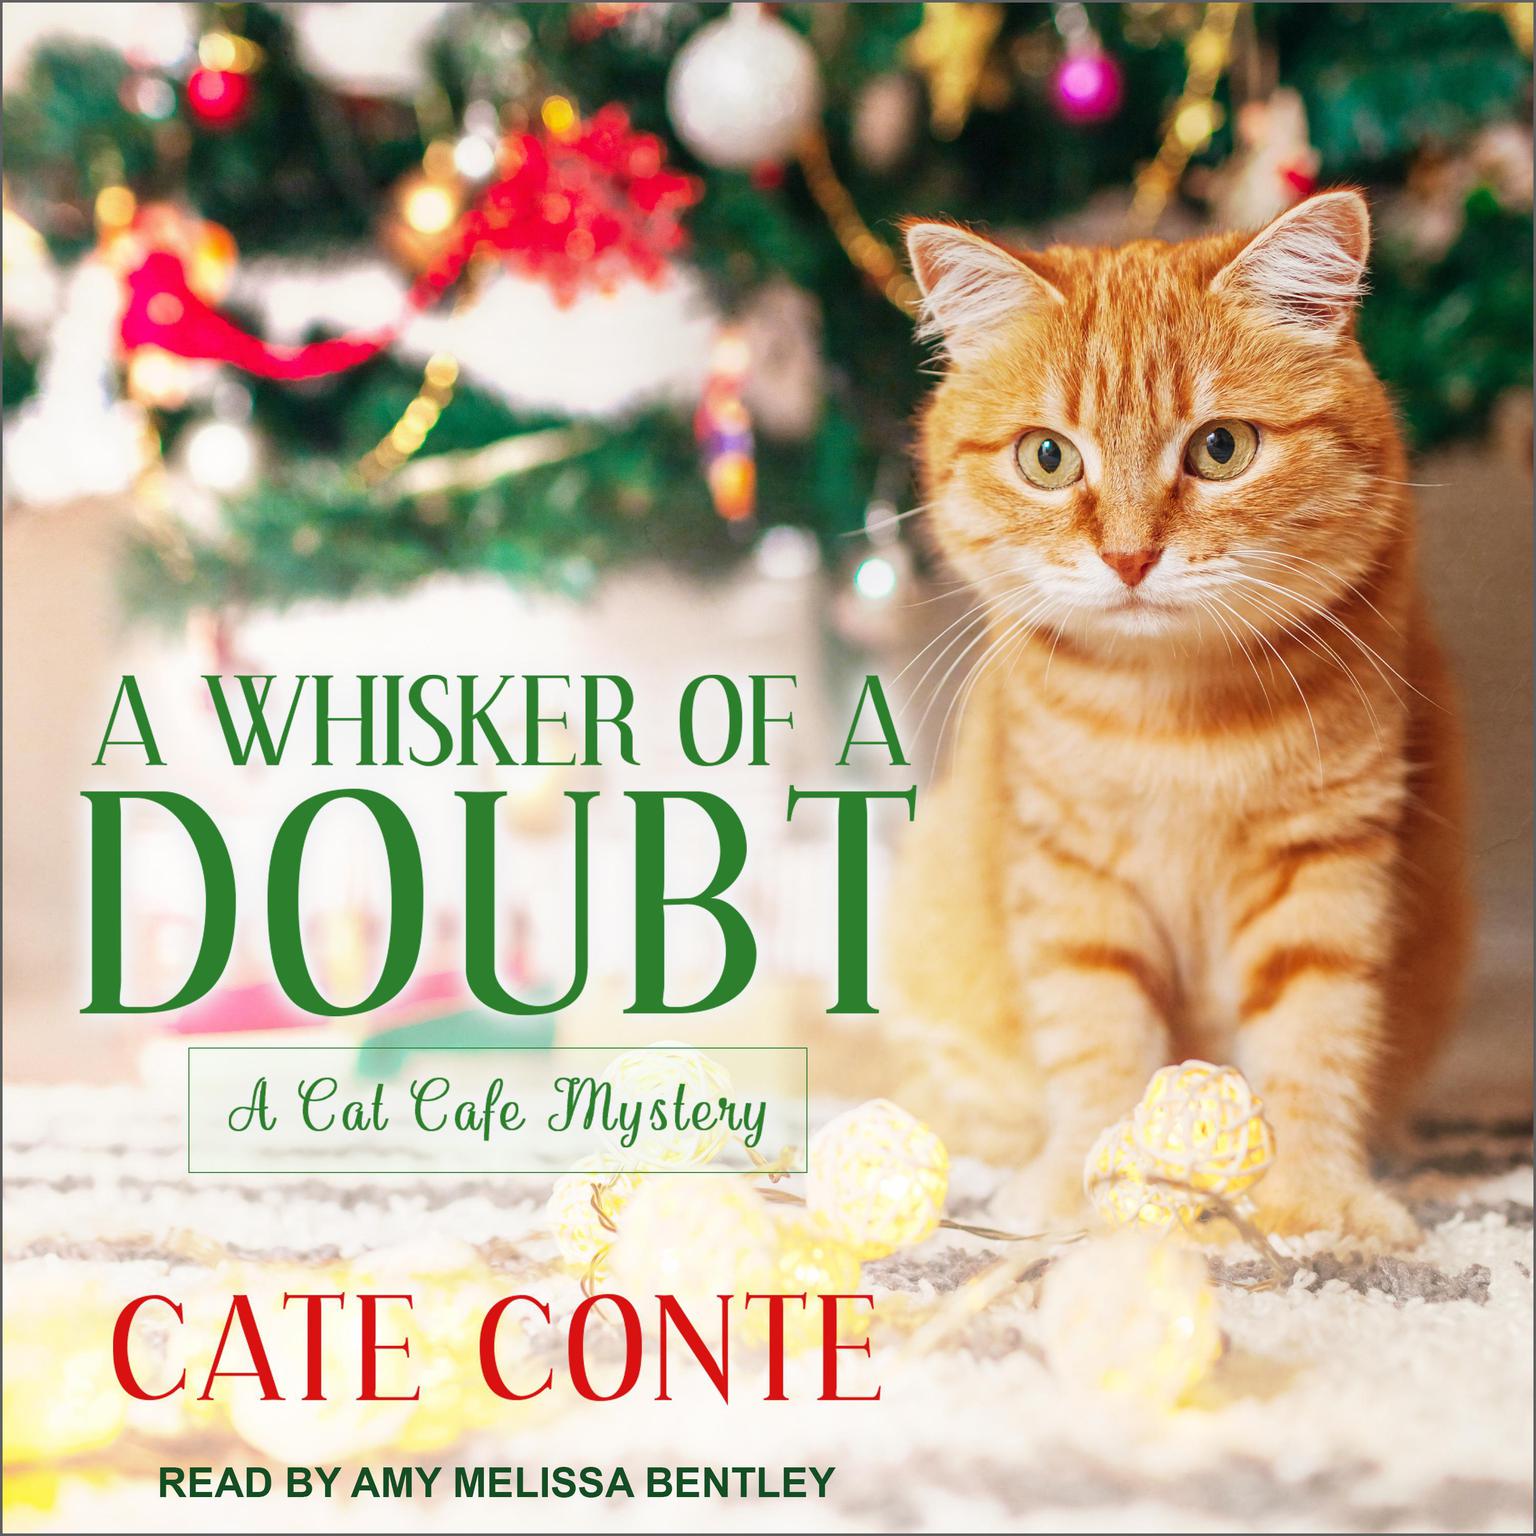 A Whisker of a Doubt: A Cat Cafe Mystery Audiobook, by Cate Conte